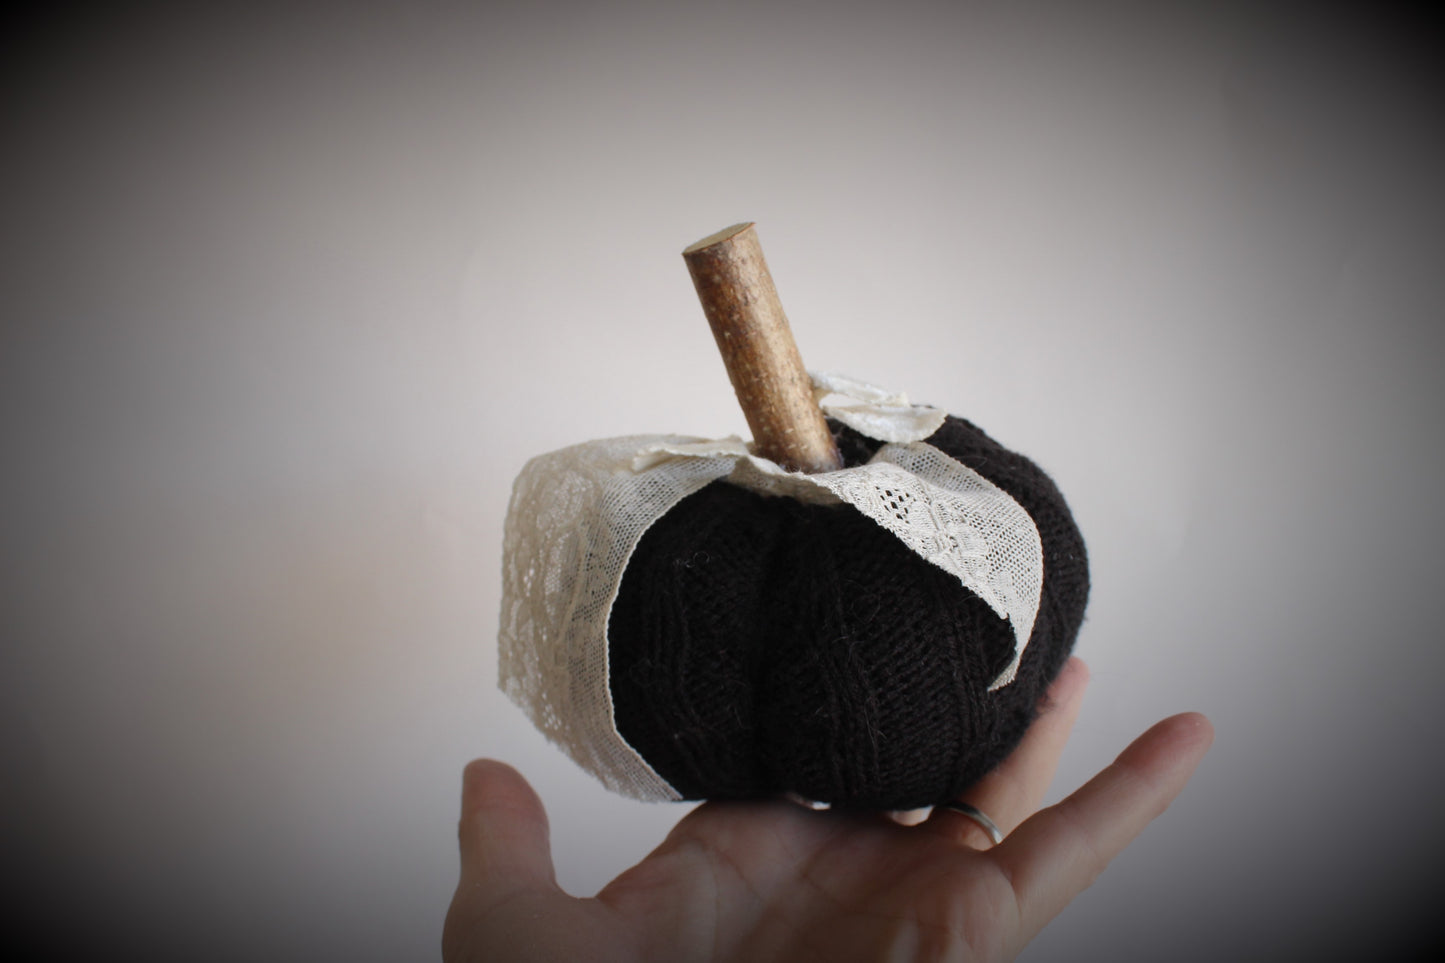 Mini Black Knit Pumpkin Pillow Pouf, With Velvet Leaves, Ivory Lace and Wooden Stem